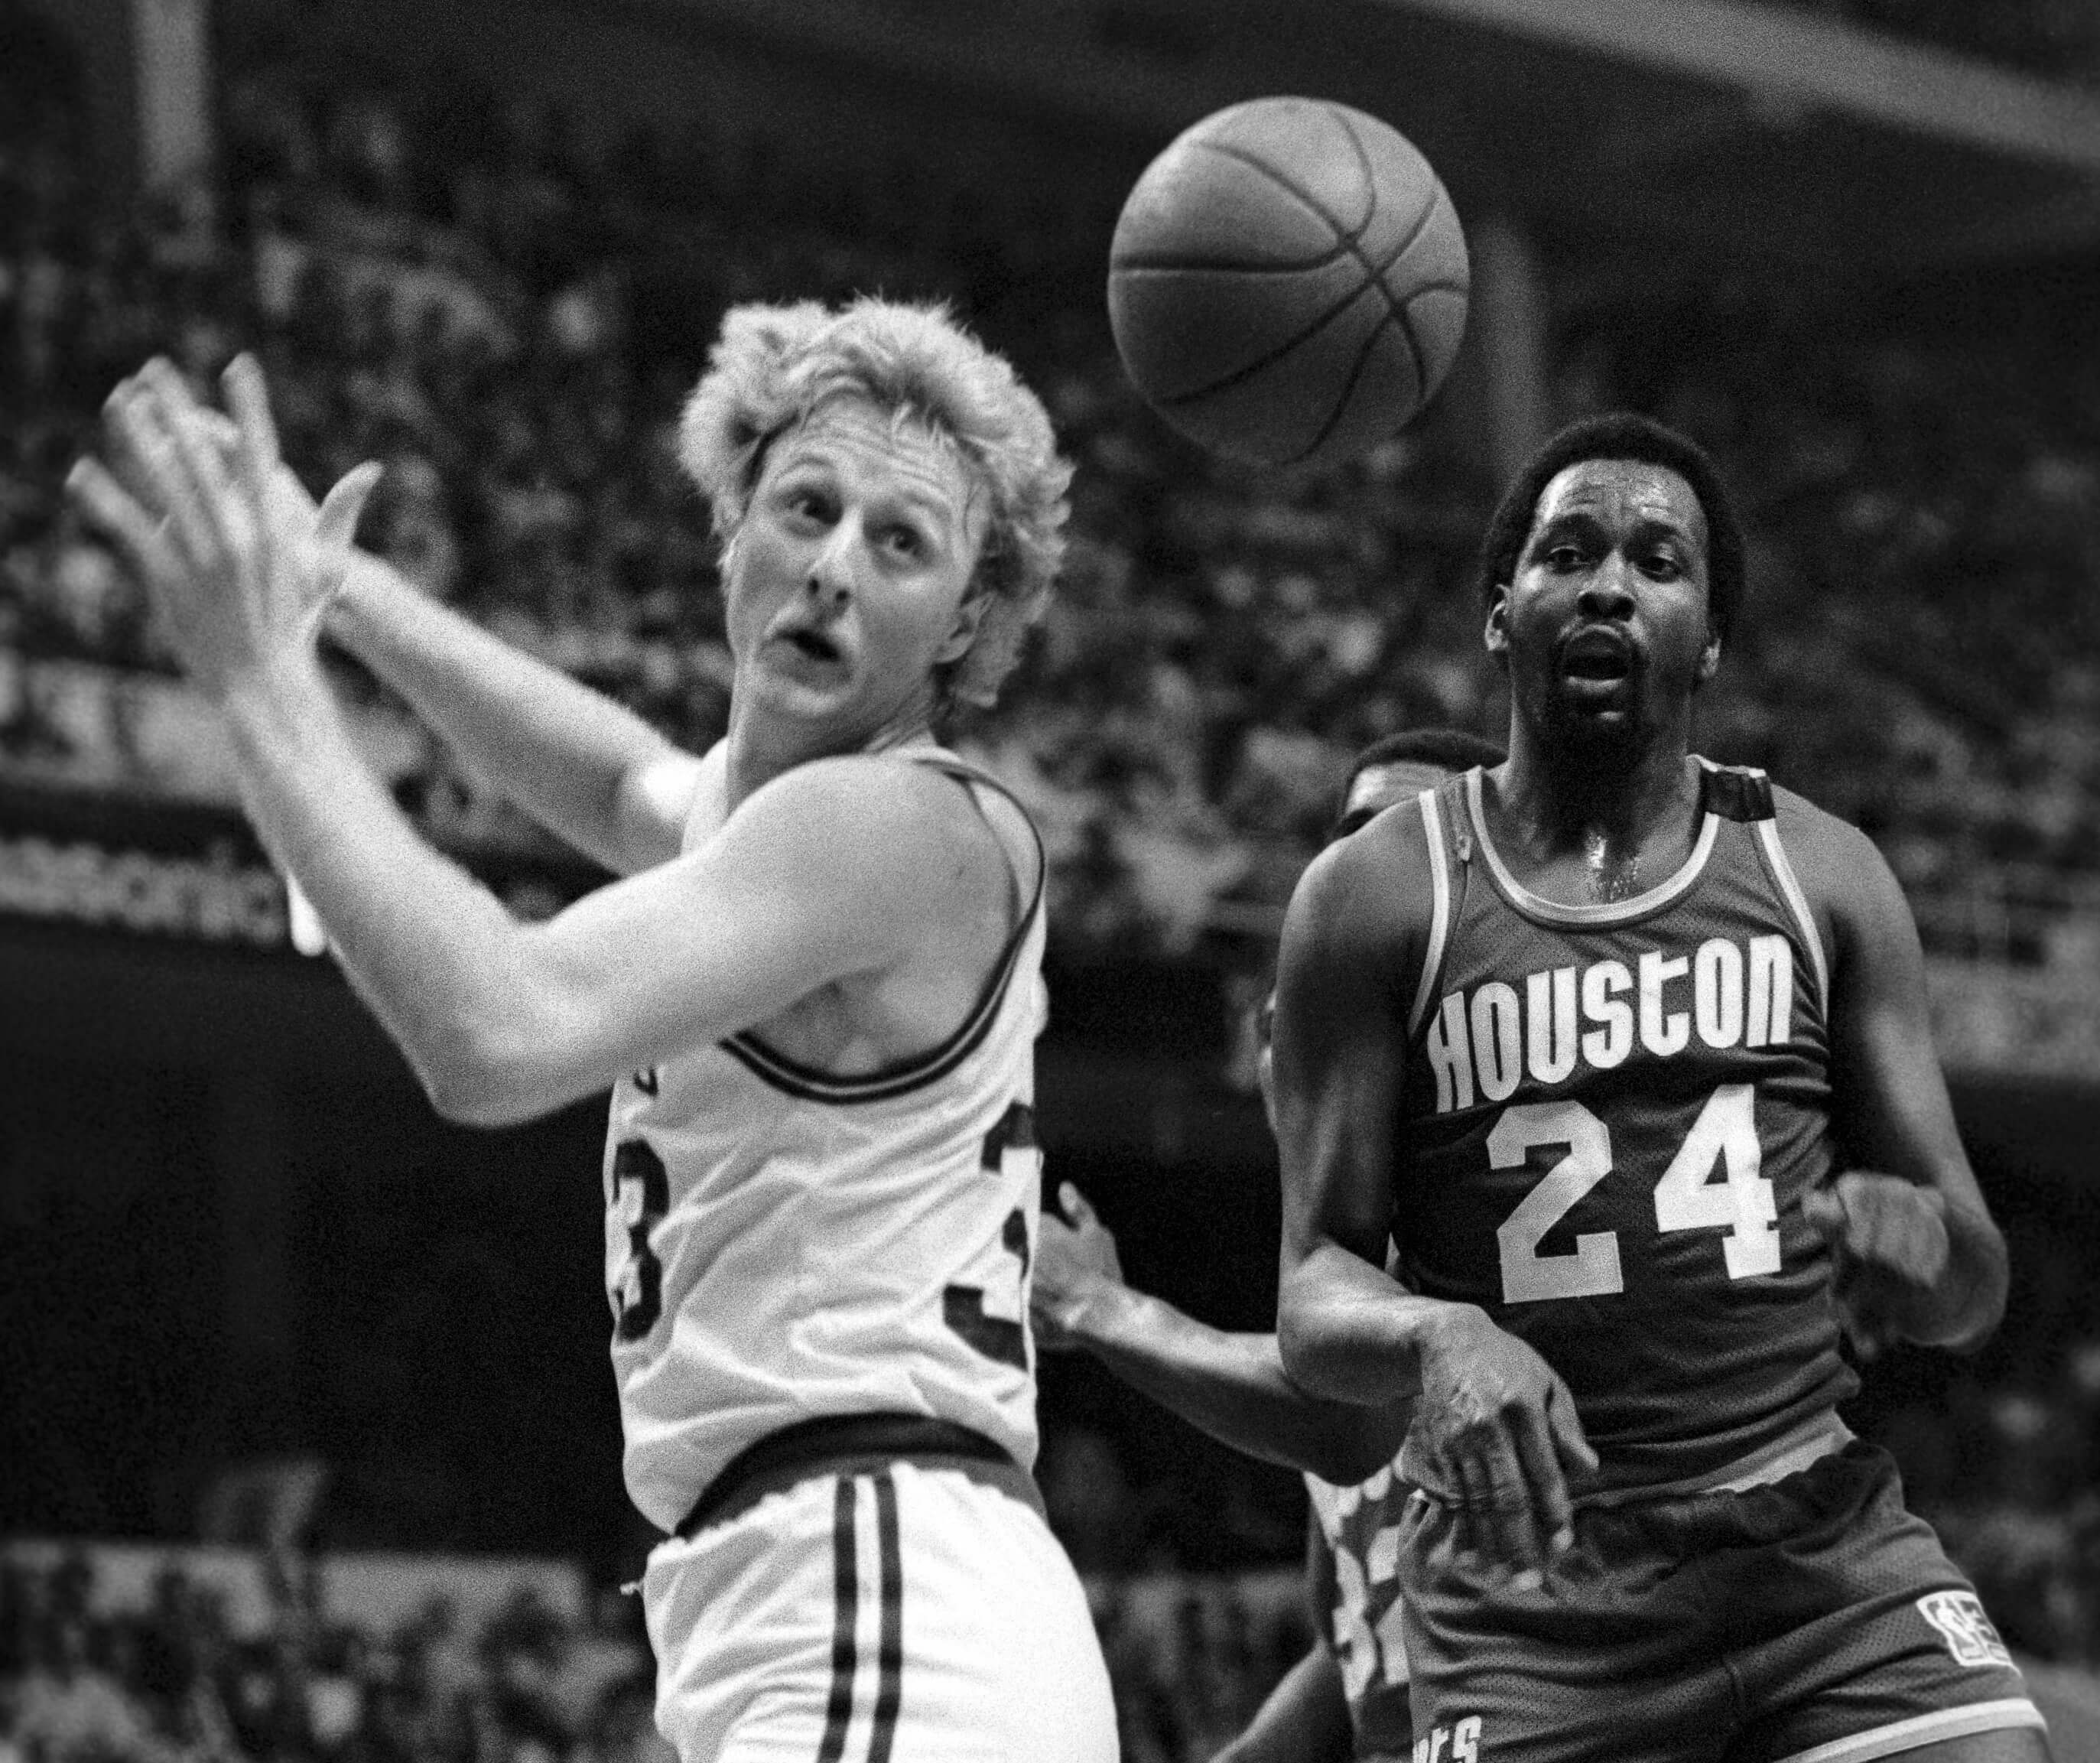 Larry Bird and Rockets Moses Malone watch the ball intended for Bird fly by.